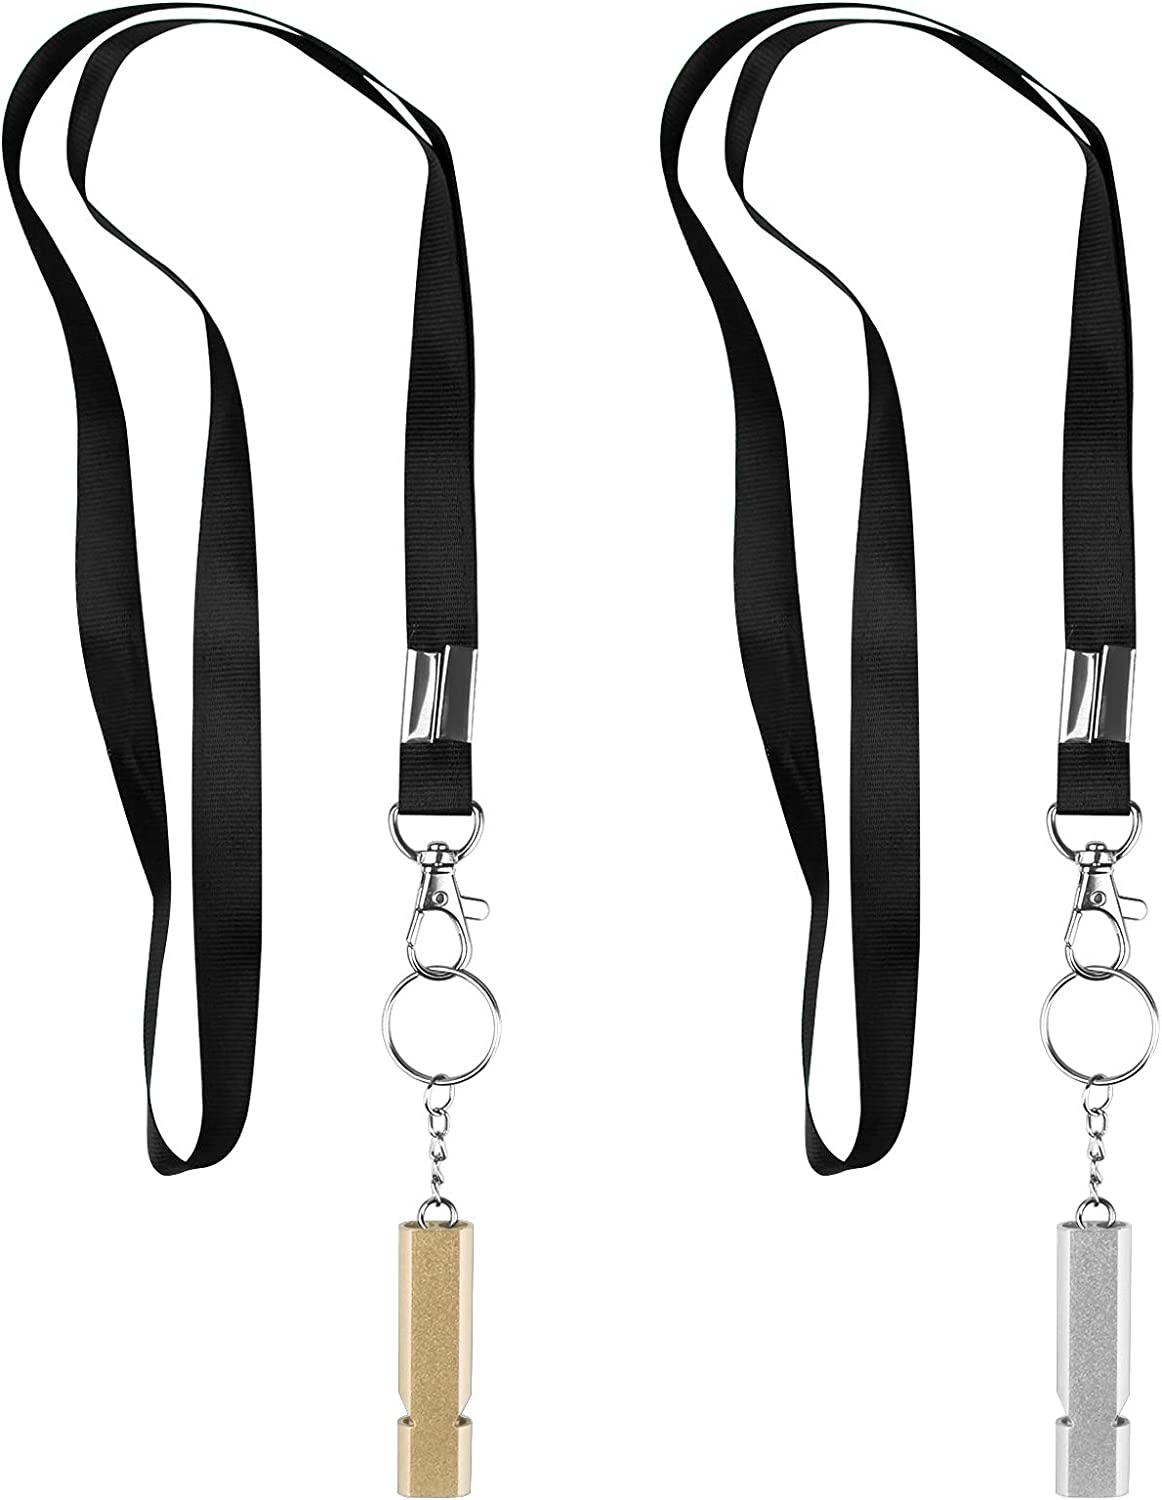 Whistles with carabiner and lanyard, 2 pieces (Silver, Gold)